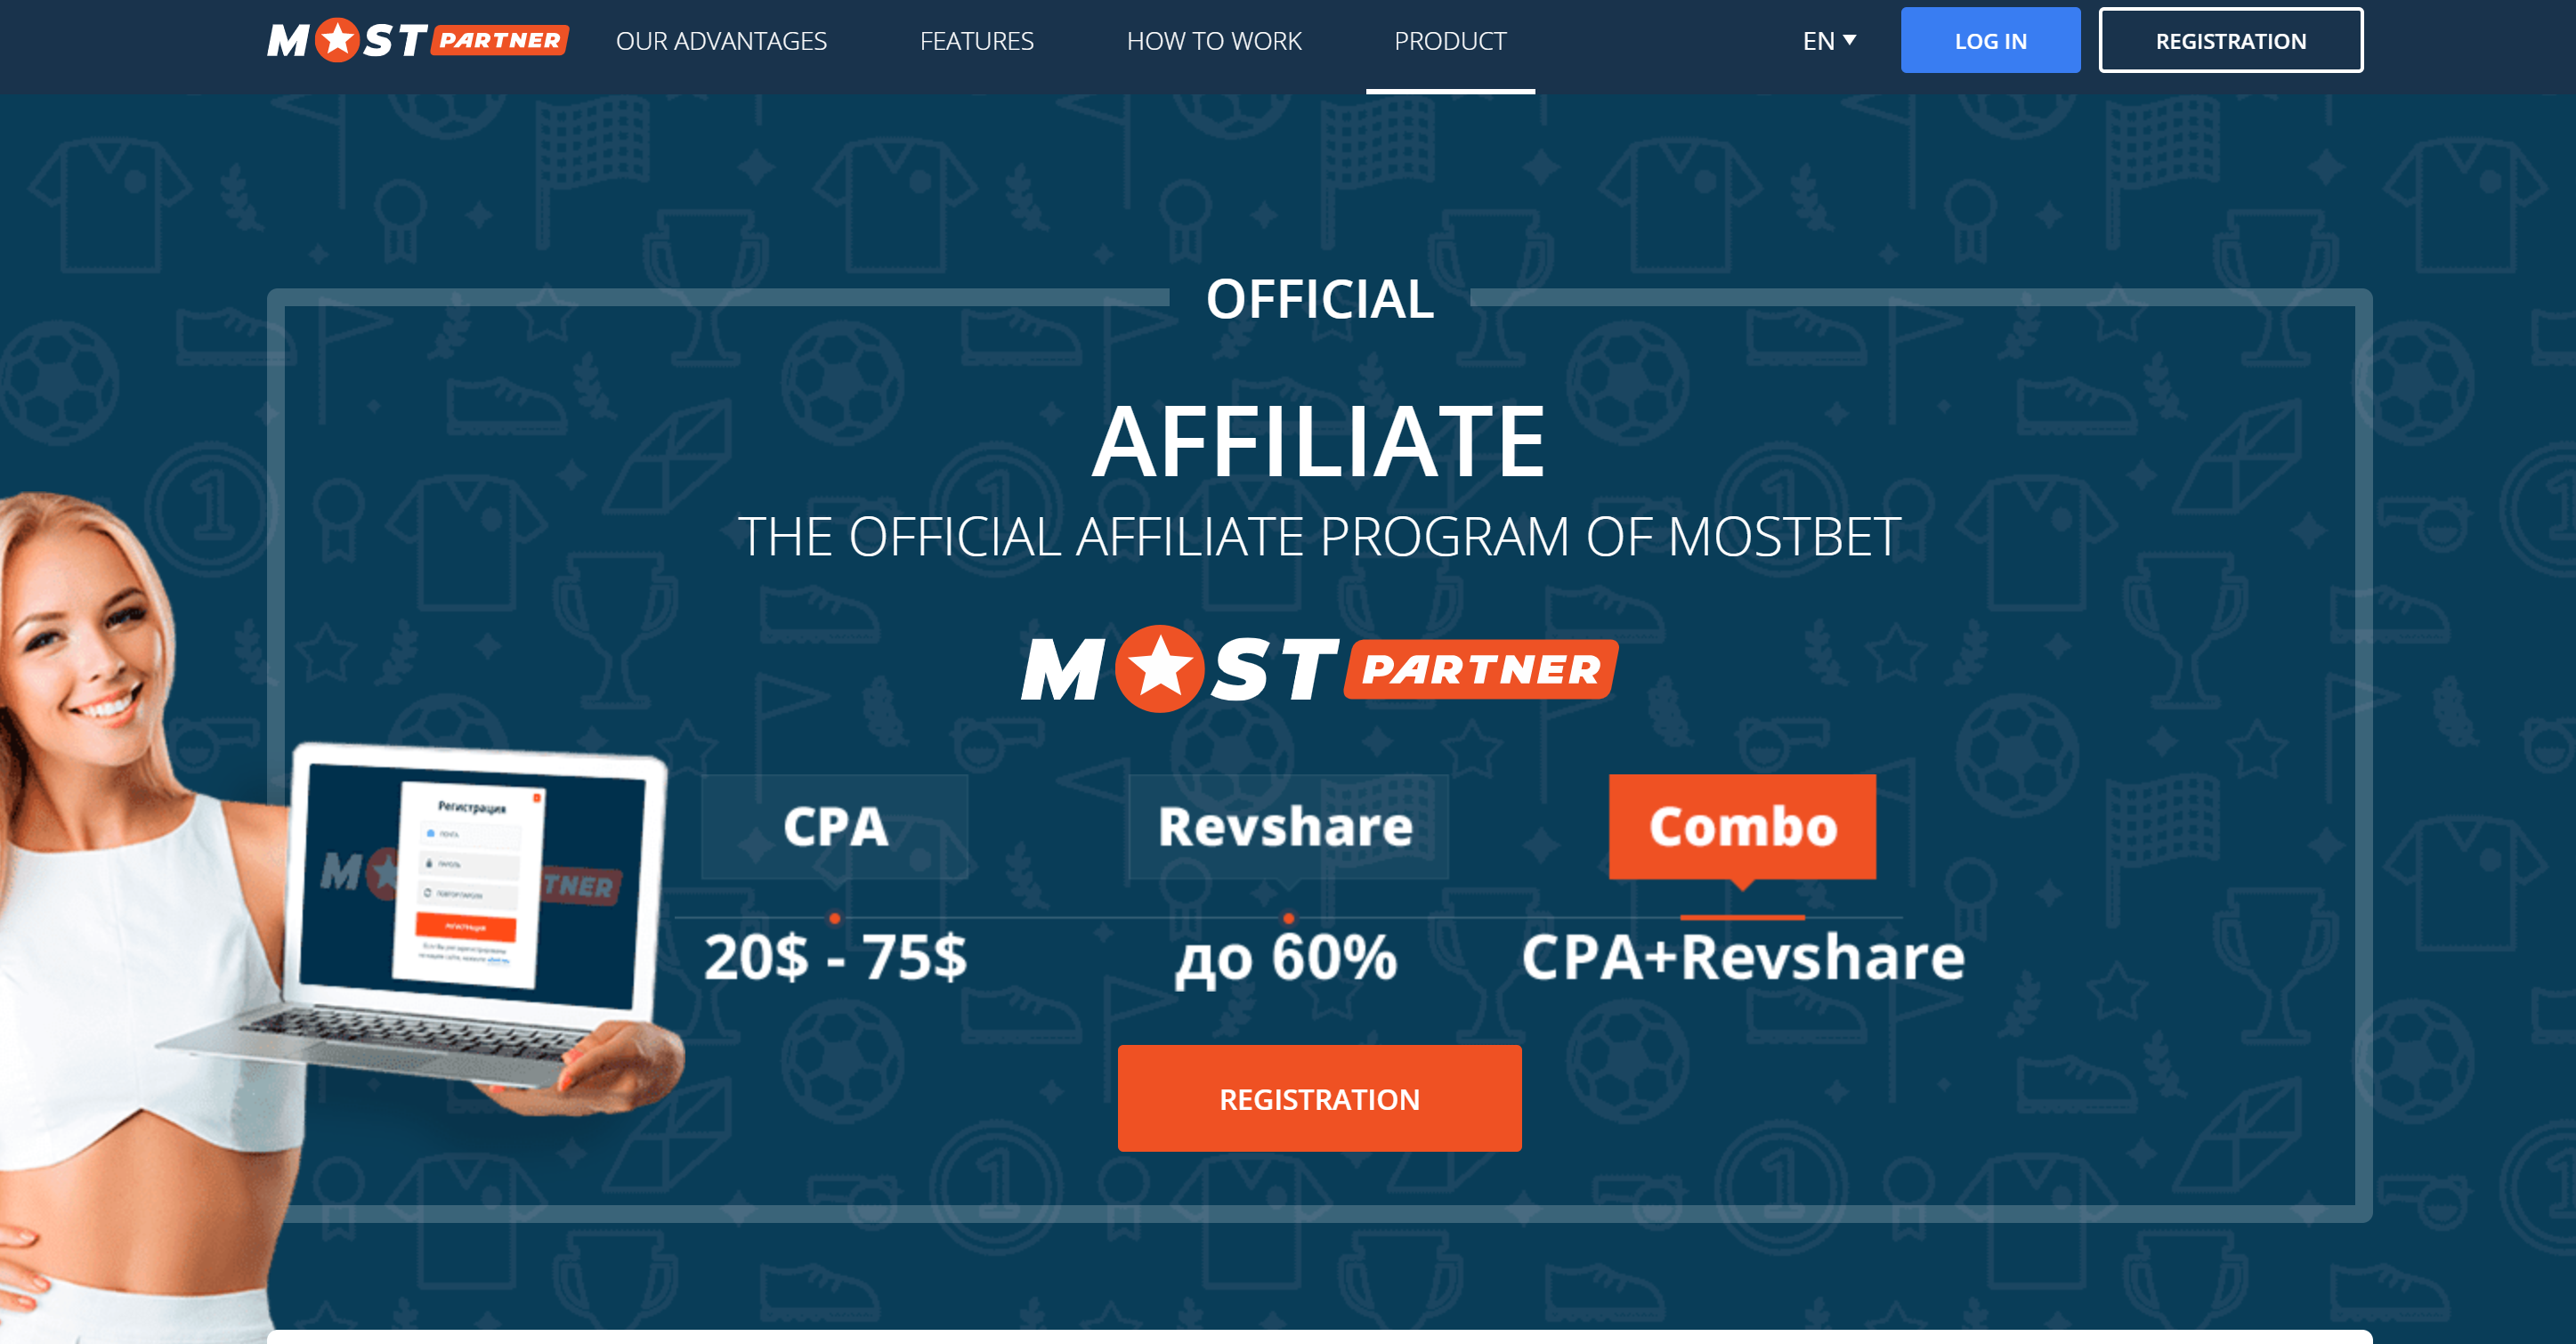 Don't Mostbet Online Casino Games Company Unless You Use These 10 Tools